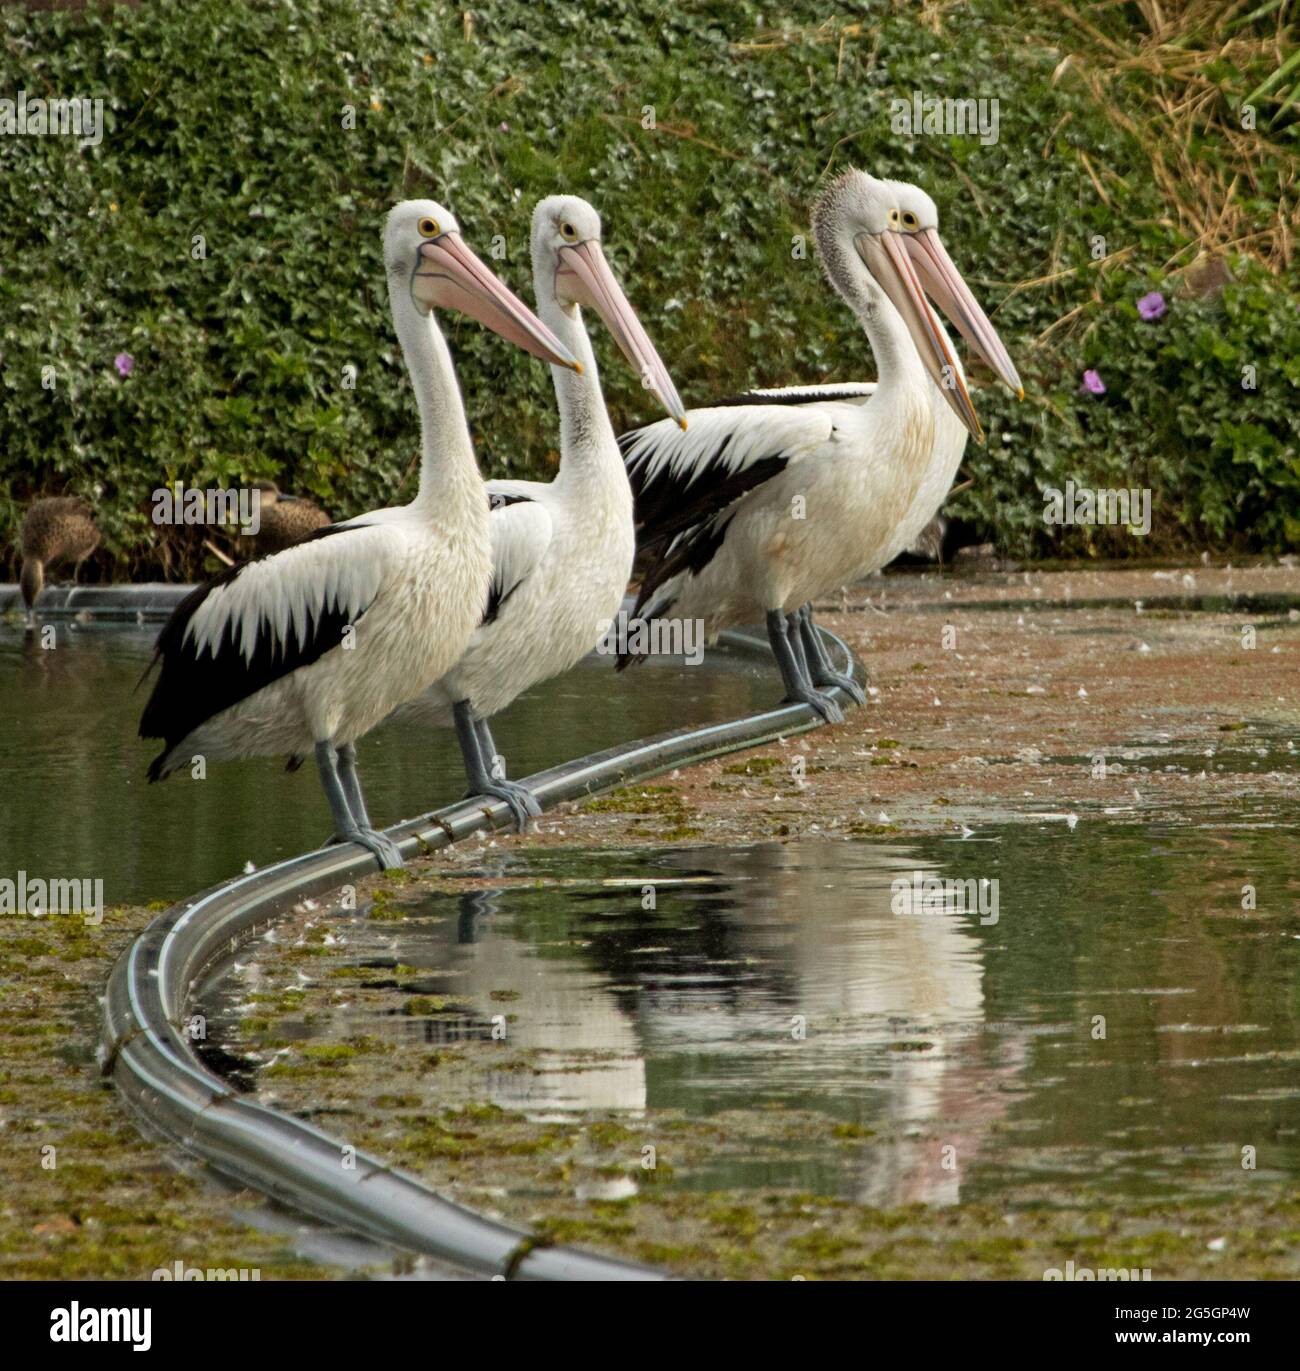 Trio of pelicans, Pelecanus conspicillatus, perched on an irrigation pipe and reflected in calm water of a lake in a city park in Queensland Australia Stock Photo